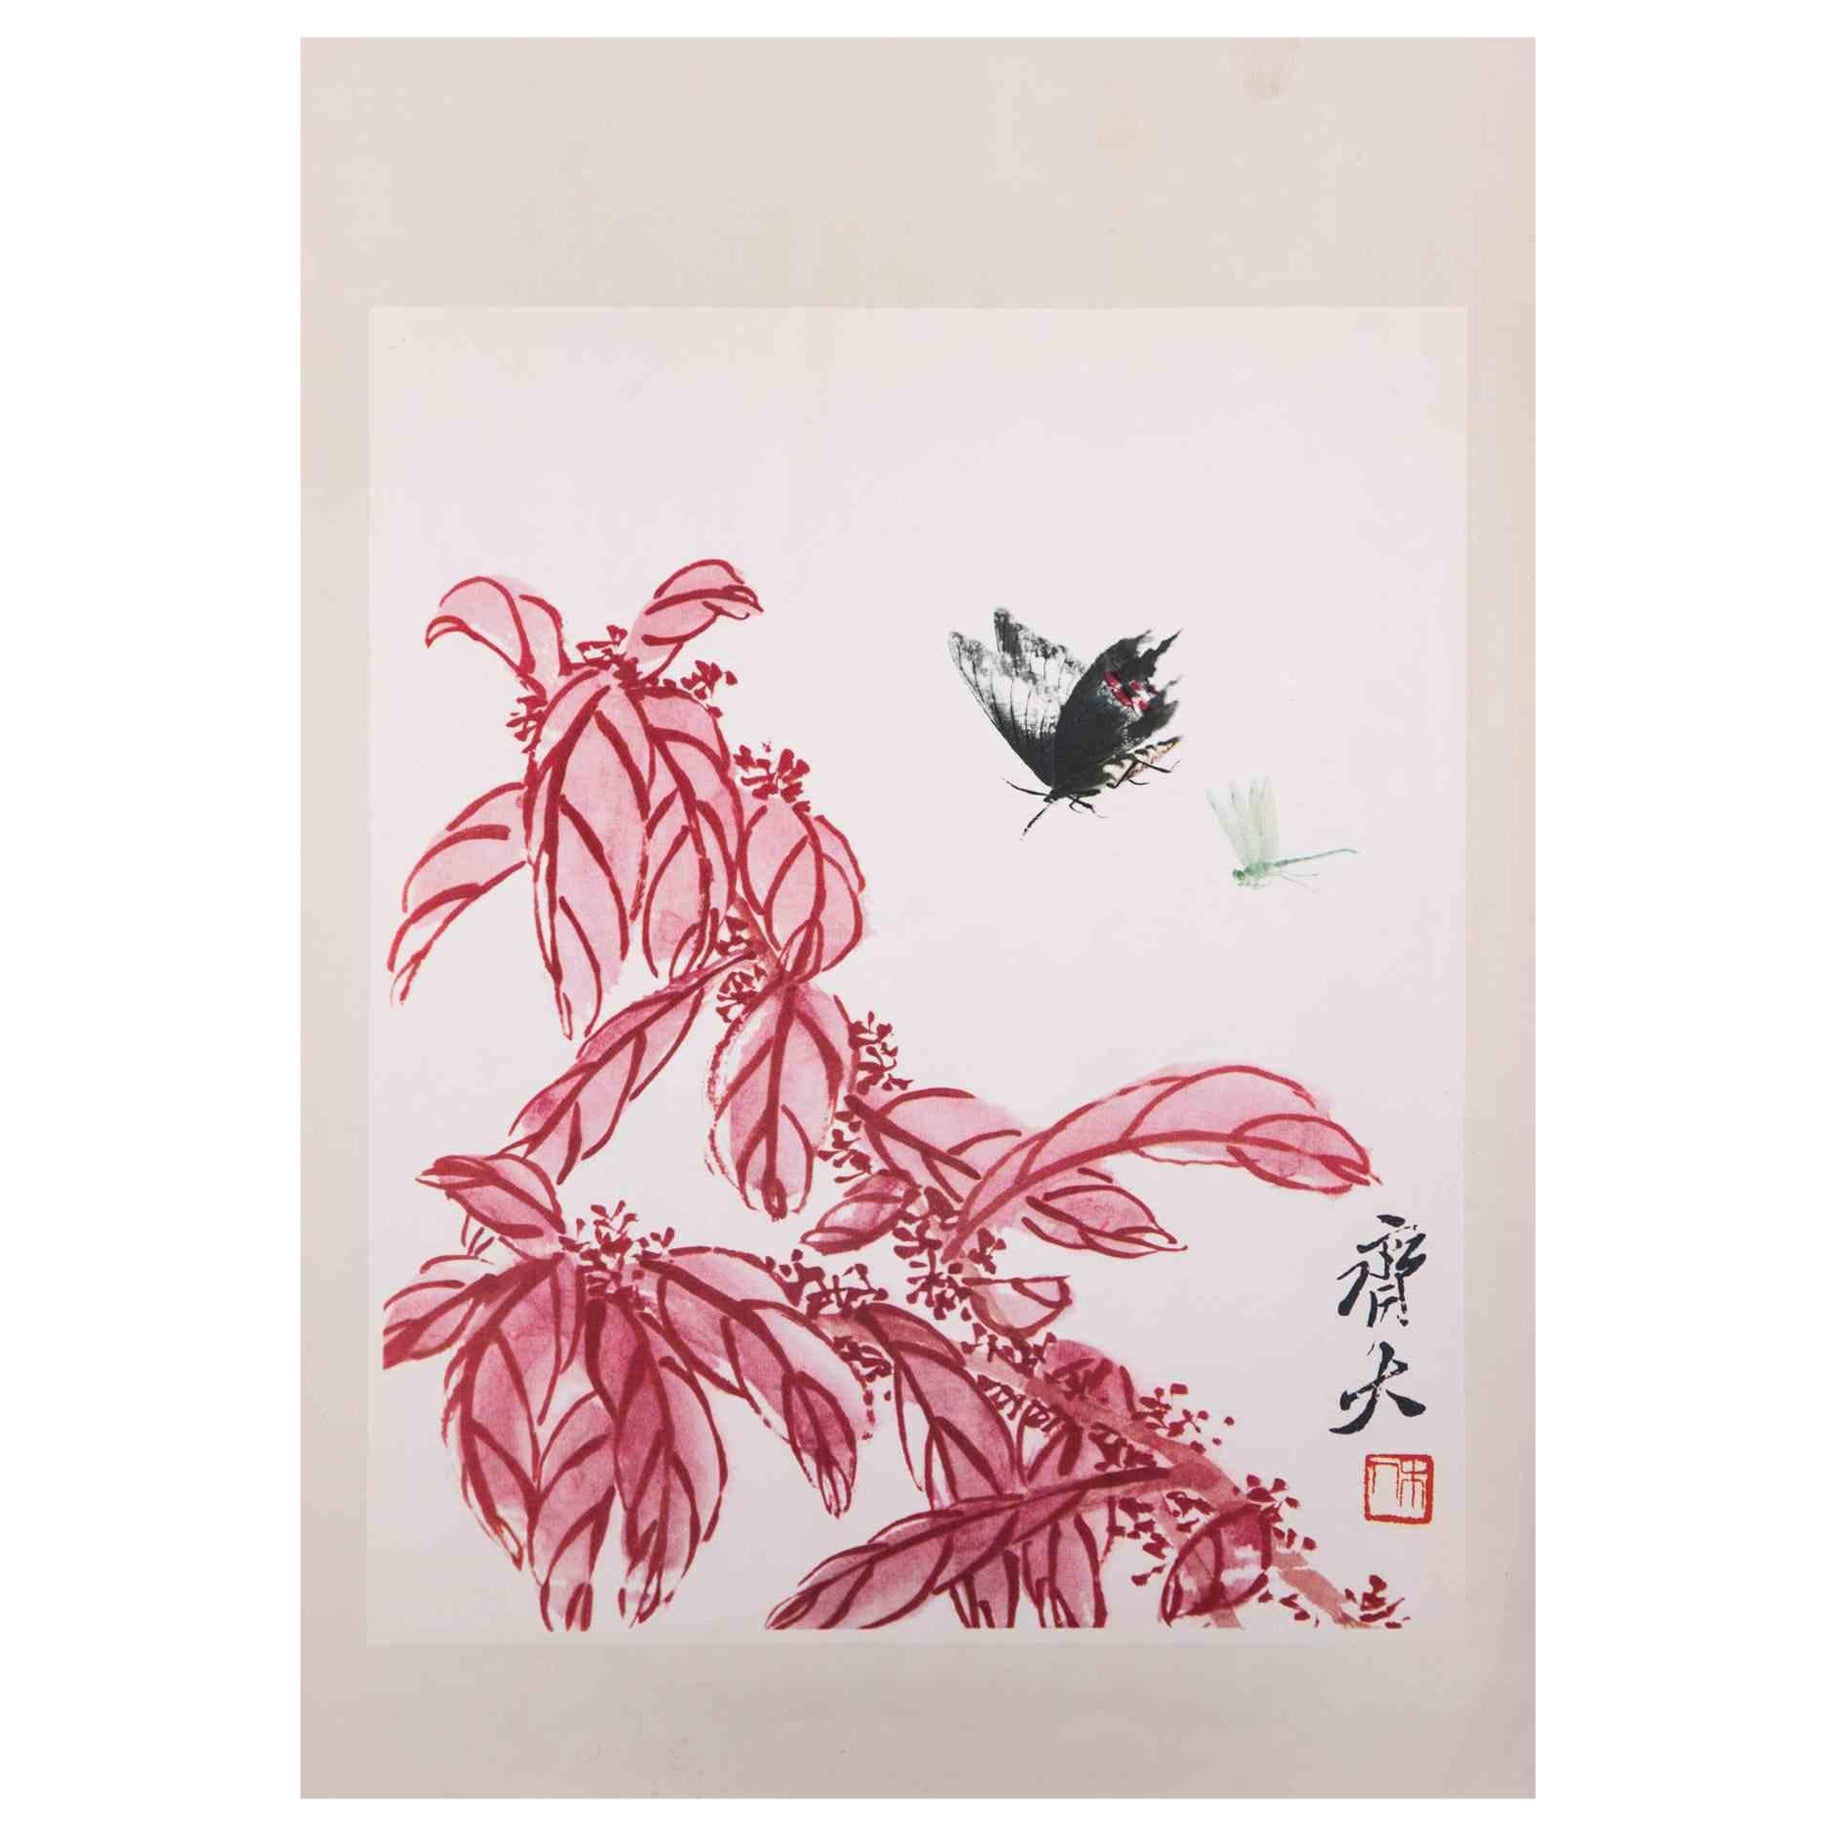 Unknown Figurative Print - Floral Plants - Vintage Phototype Print on Paper -Mid-20th Century